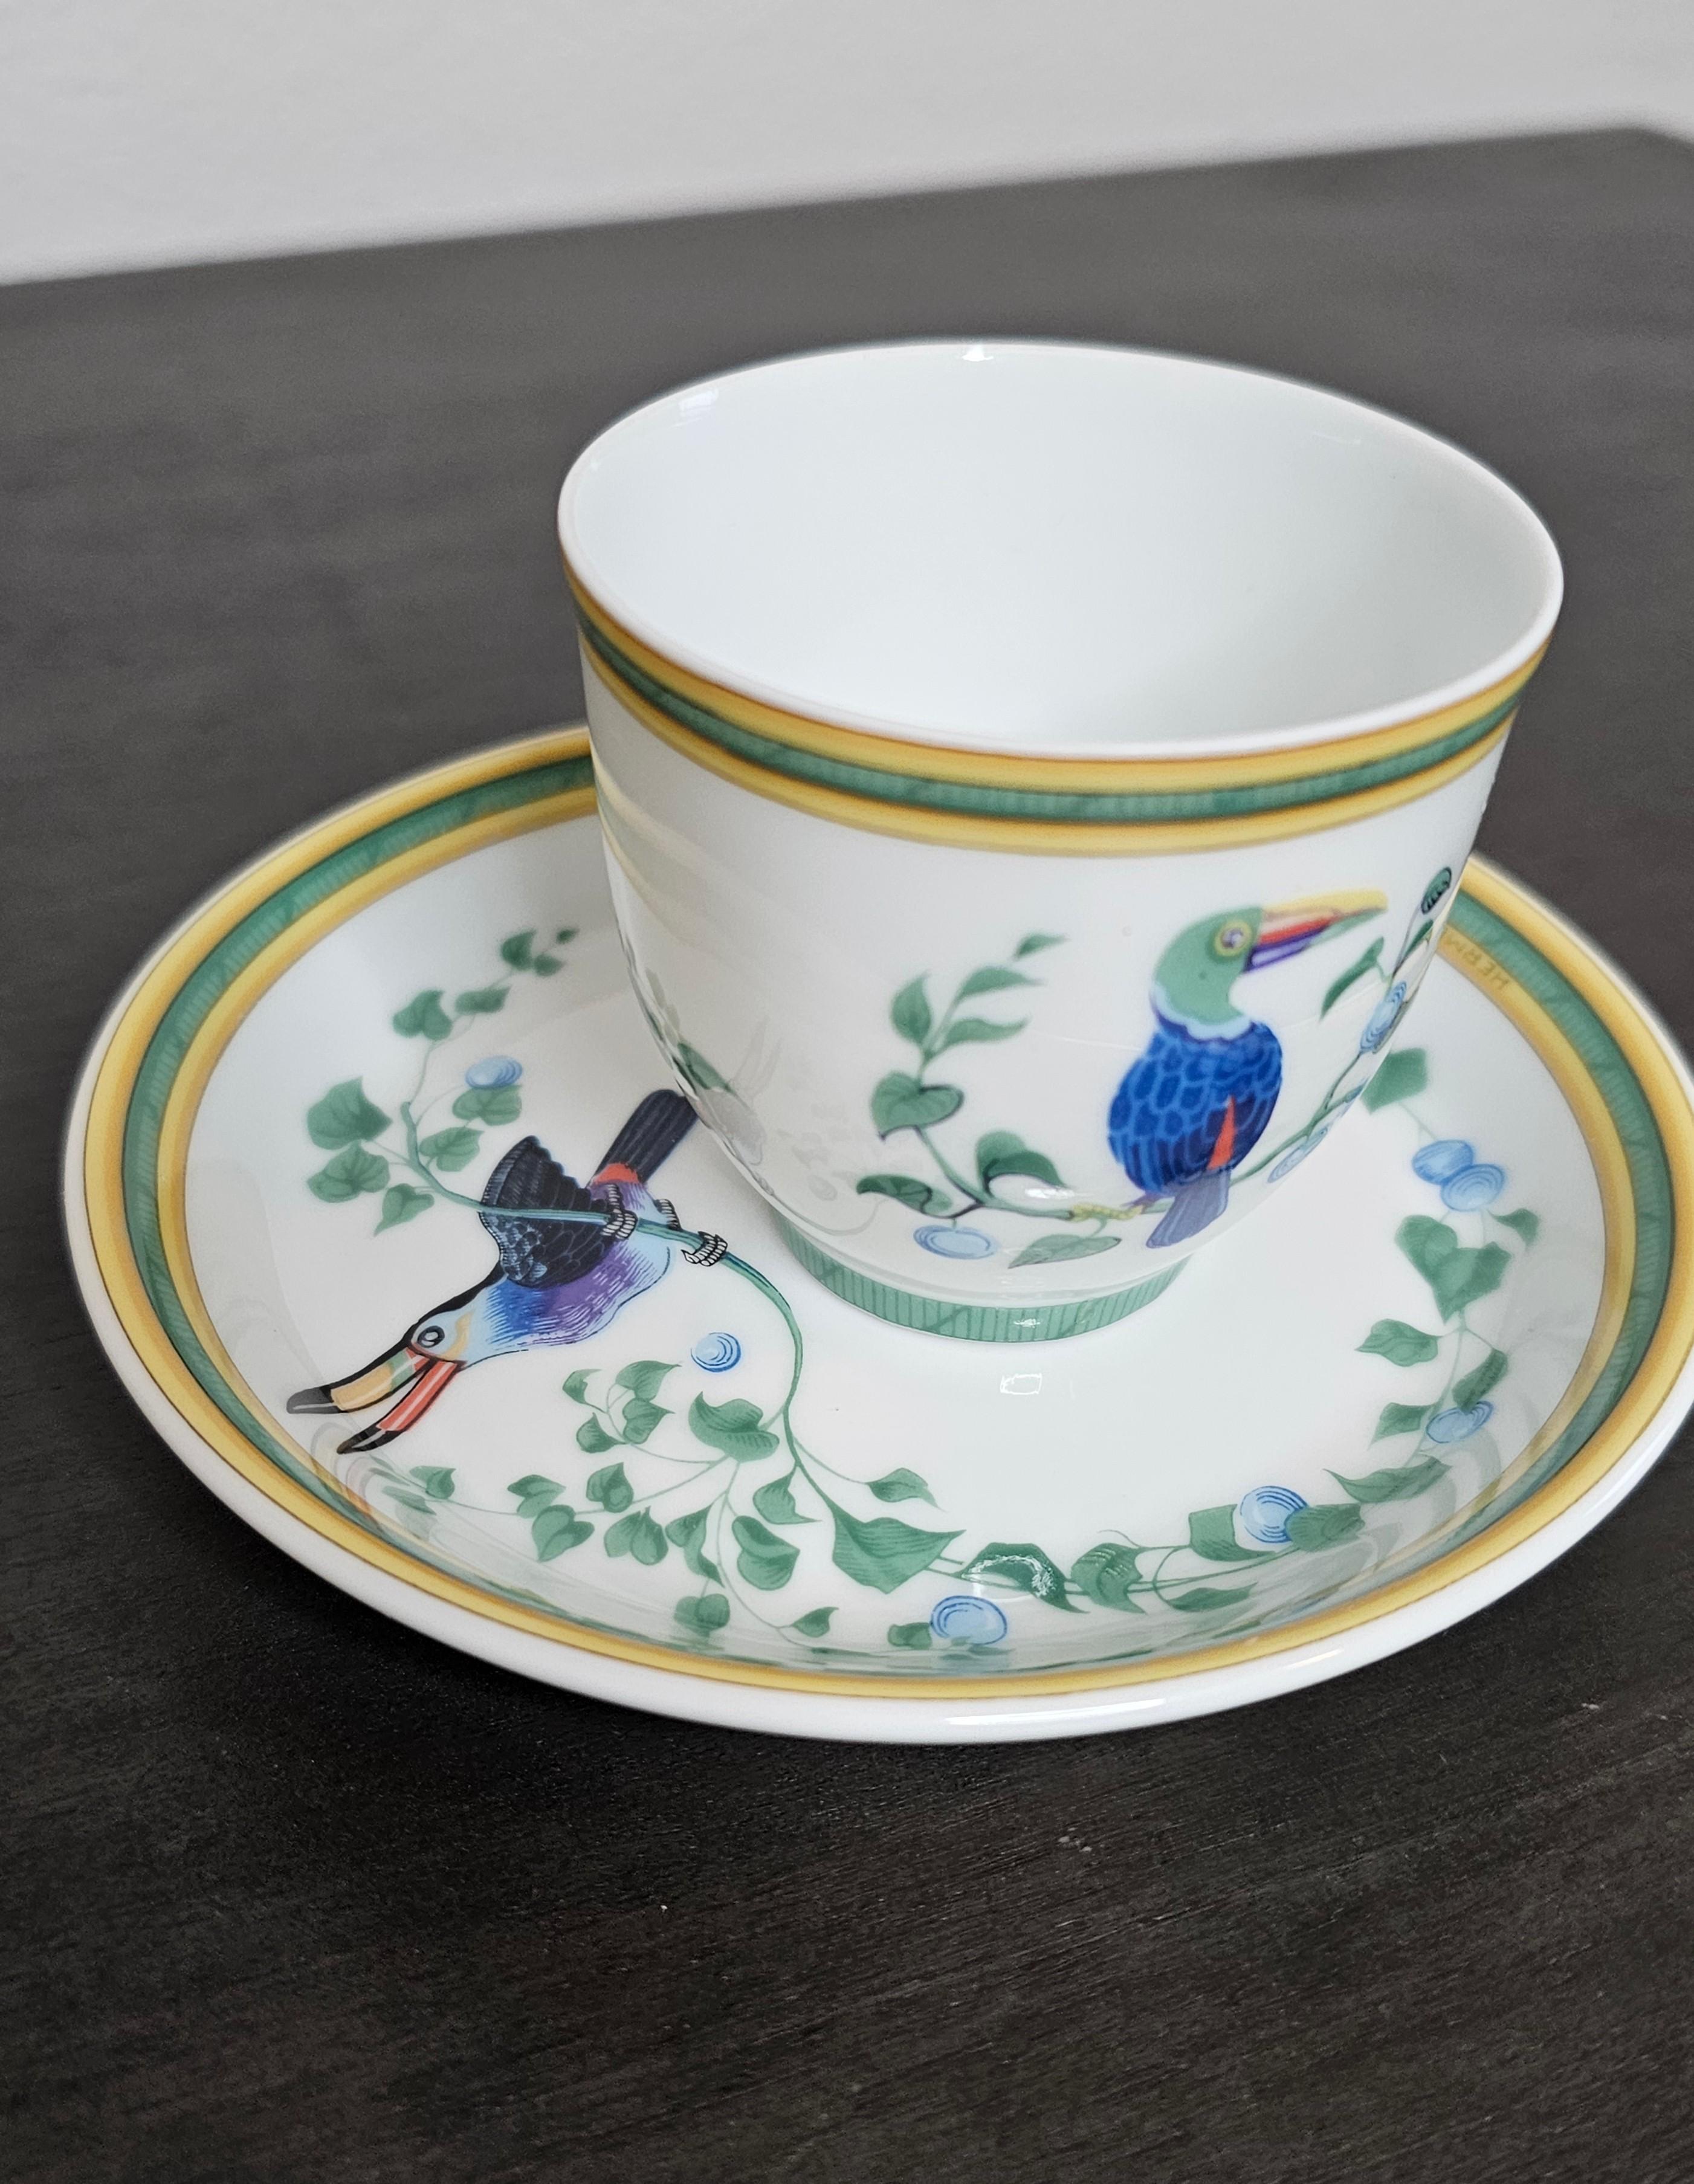 Add a touch of whimsical elegance and sophistication at your next dinner party with these charming Hermès Paris table articles!

Comprising a scarce diminutive handleless cup / bowl, accompanied with a small plate / dish / saucer, featuring